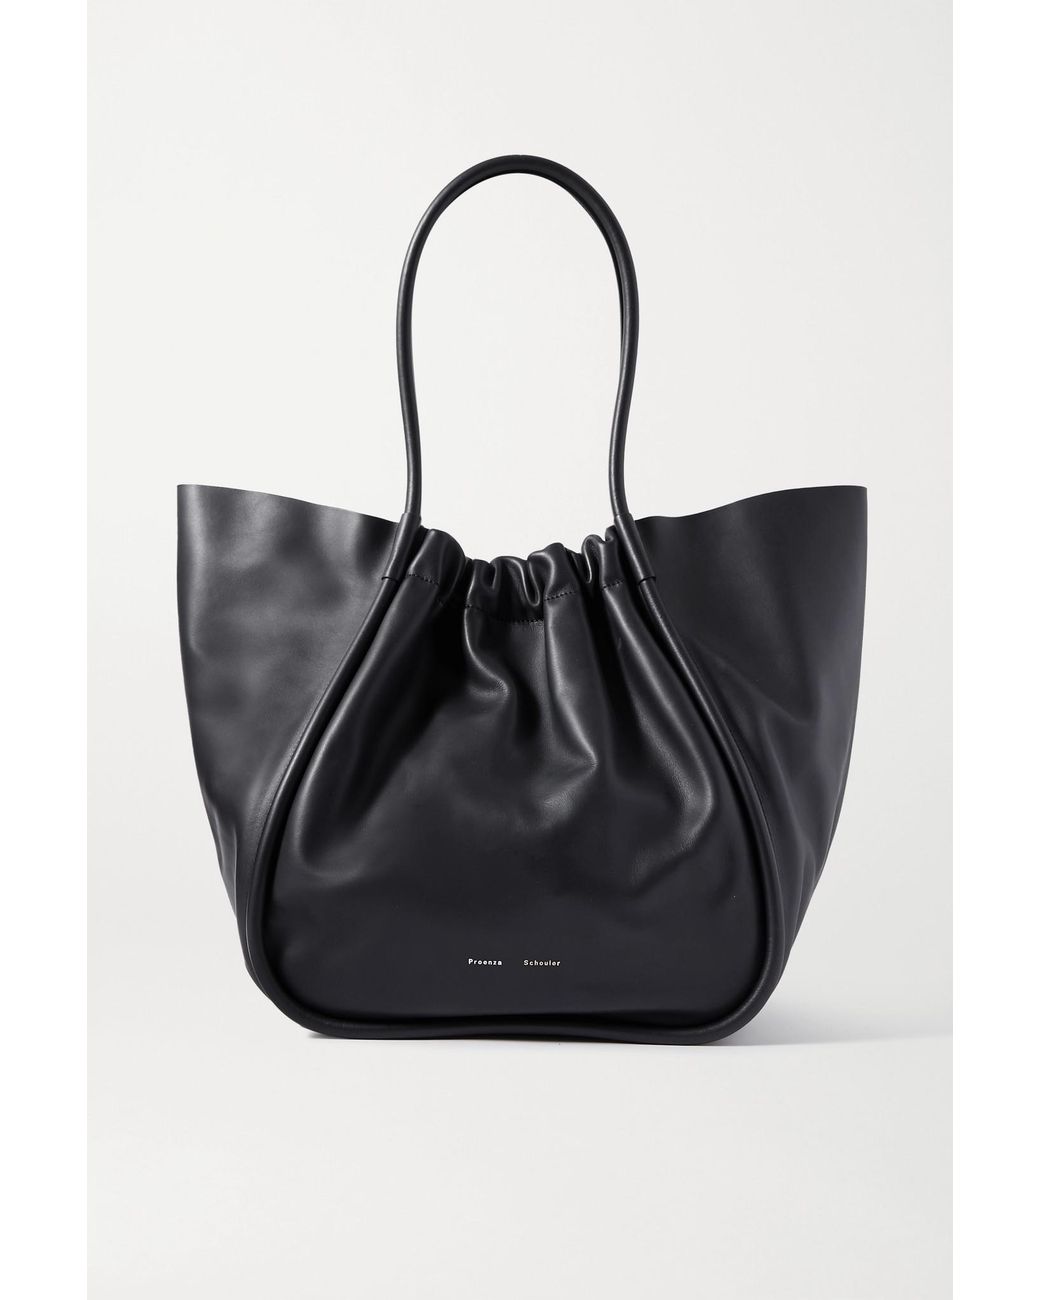 Proenza Schouler Xl Ruched Leather Tote in Black - Lyst